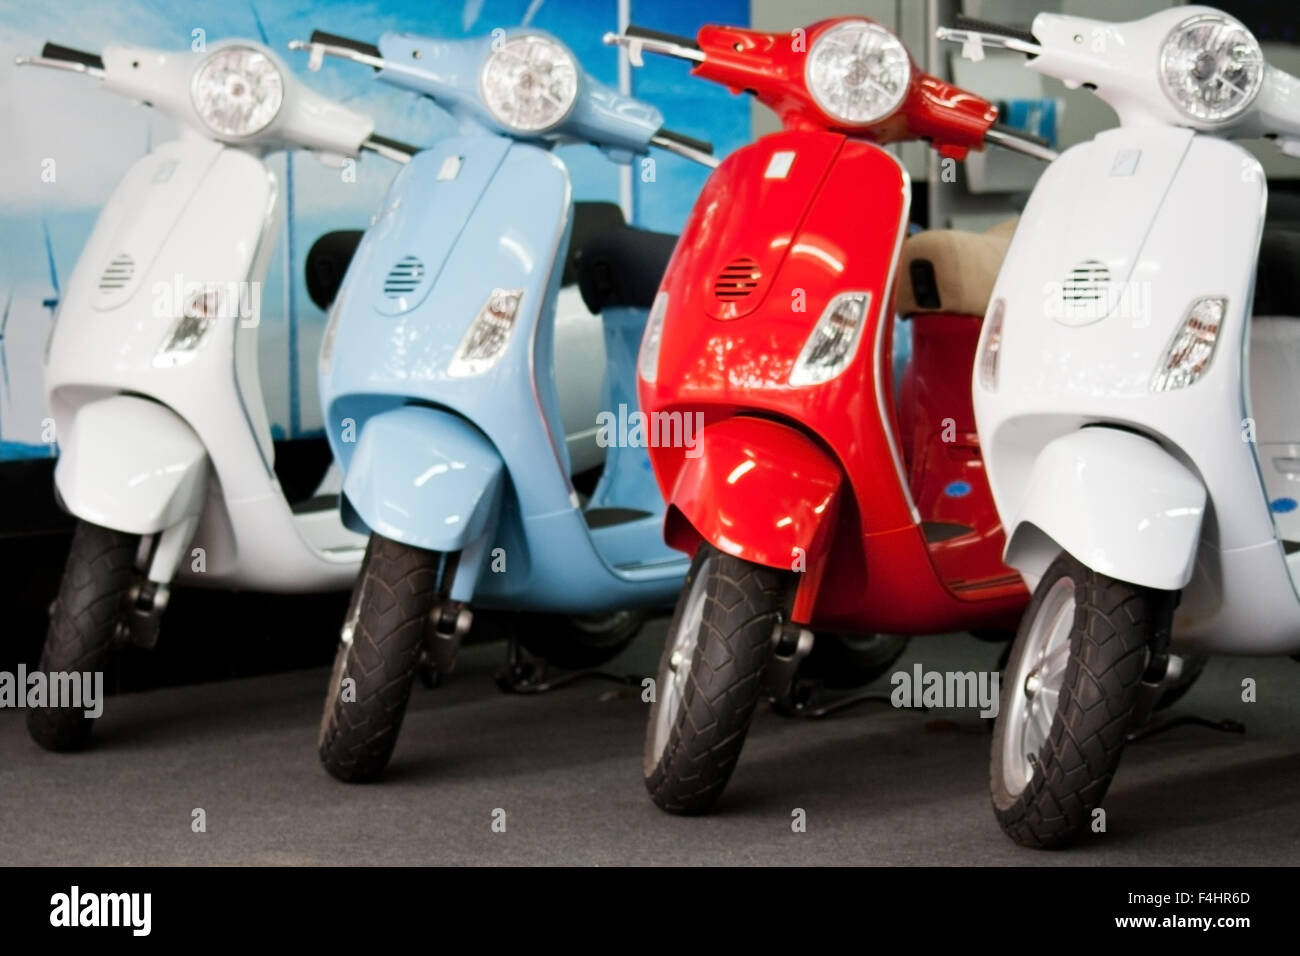 Four different colored Vespa scooters in showroom, new, immaculate, pristine, cool, chic, stylish Italian mopeds and iconic mode of transport Stock Photo